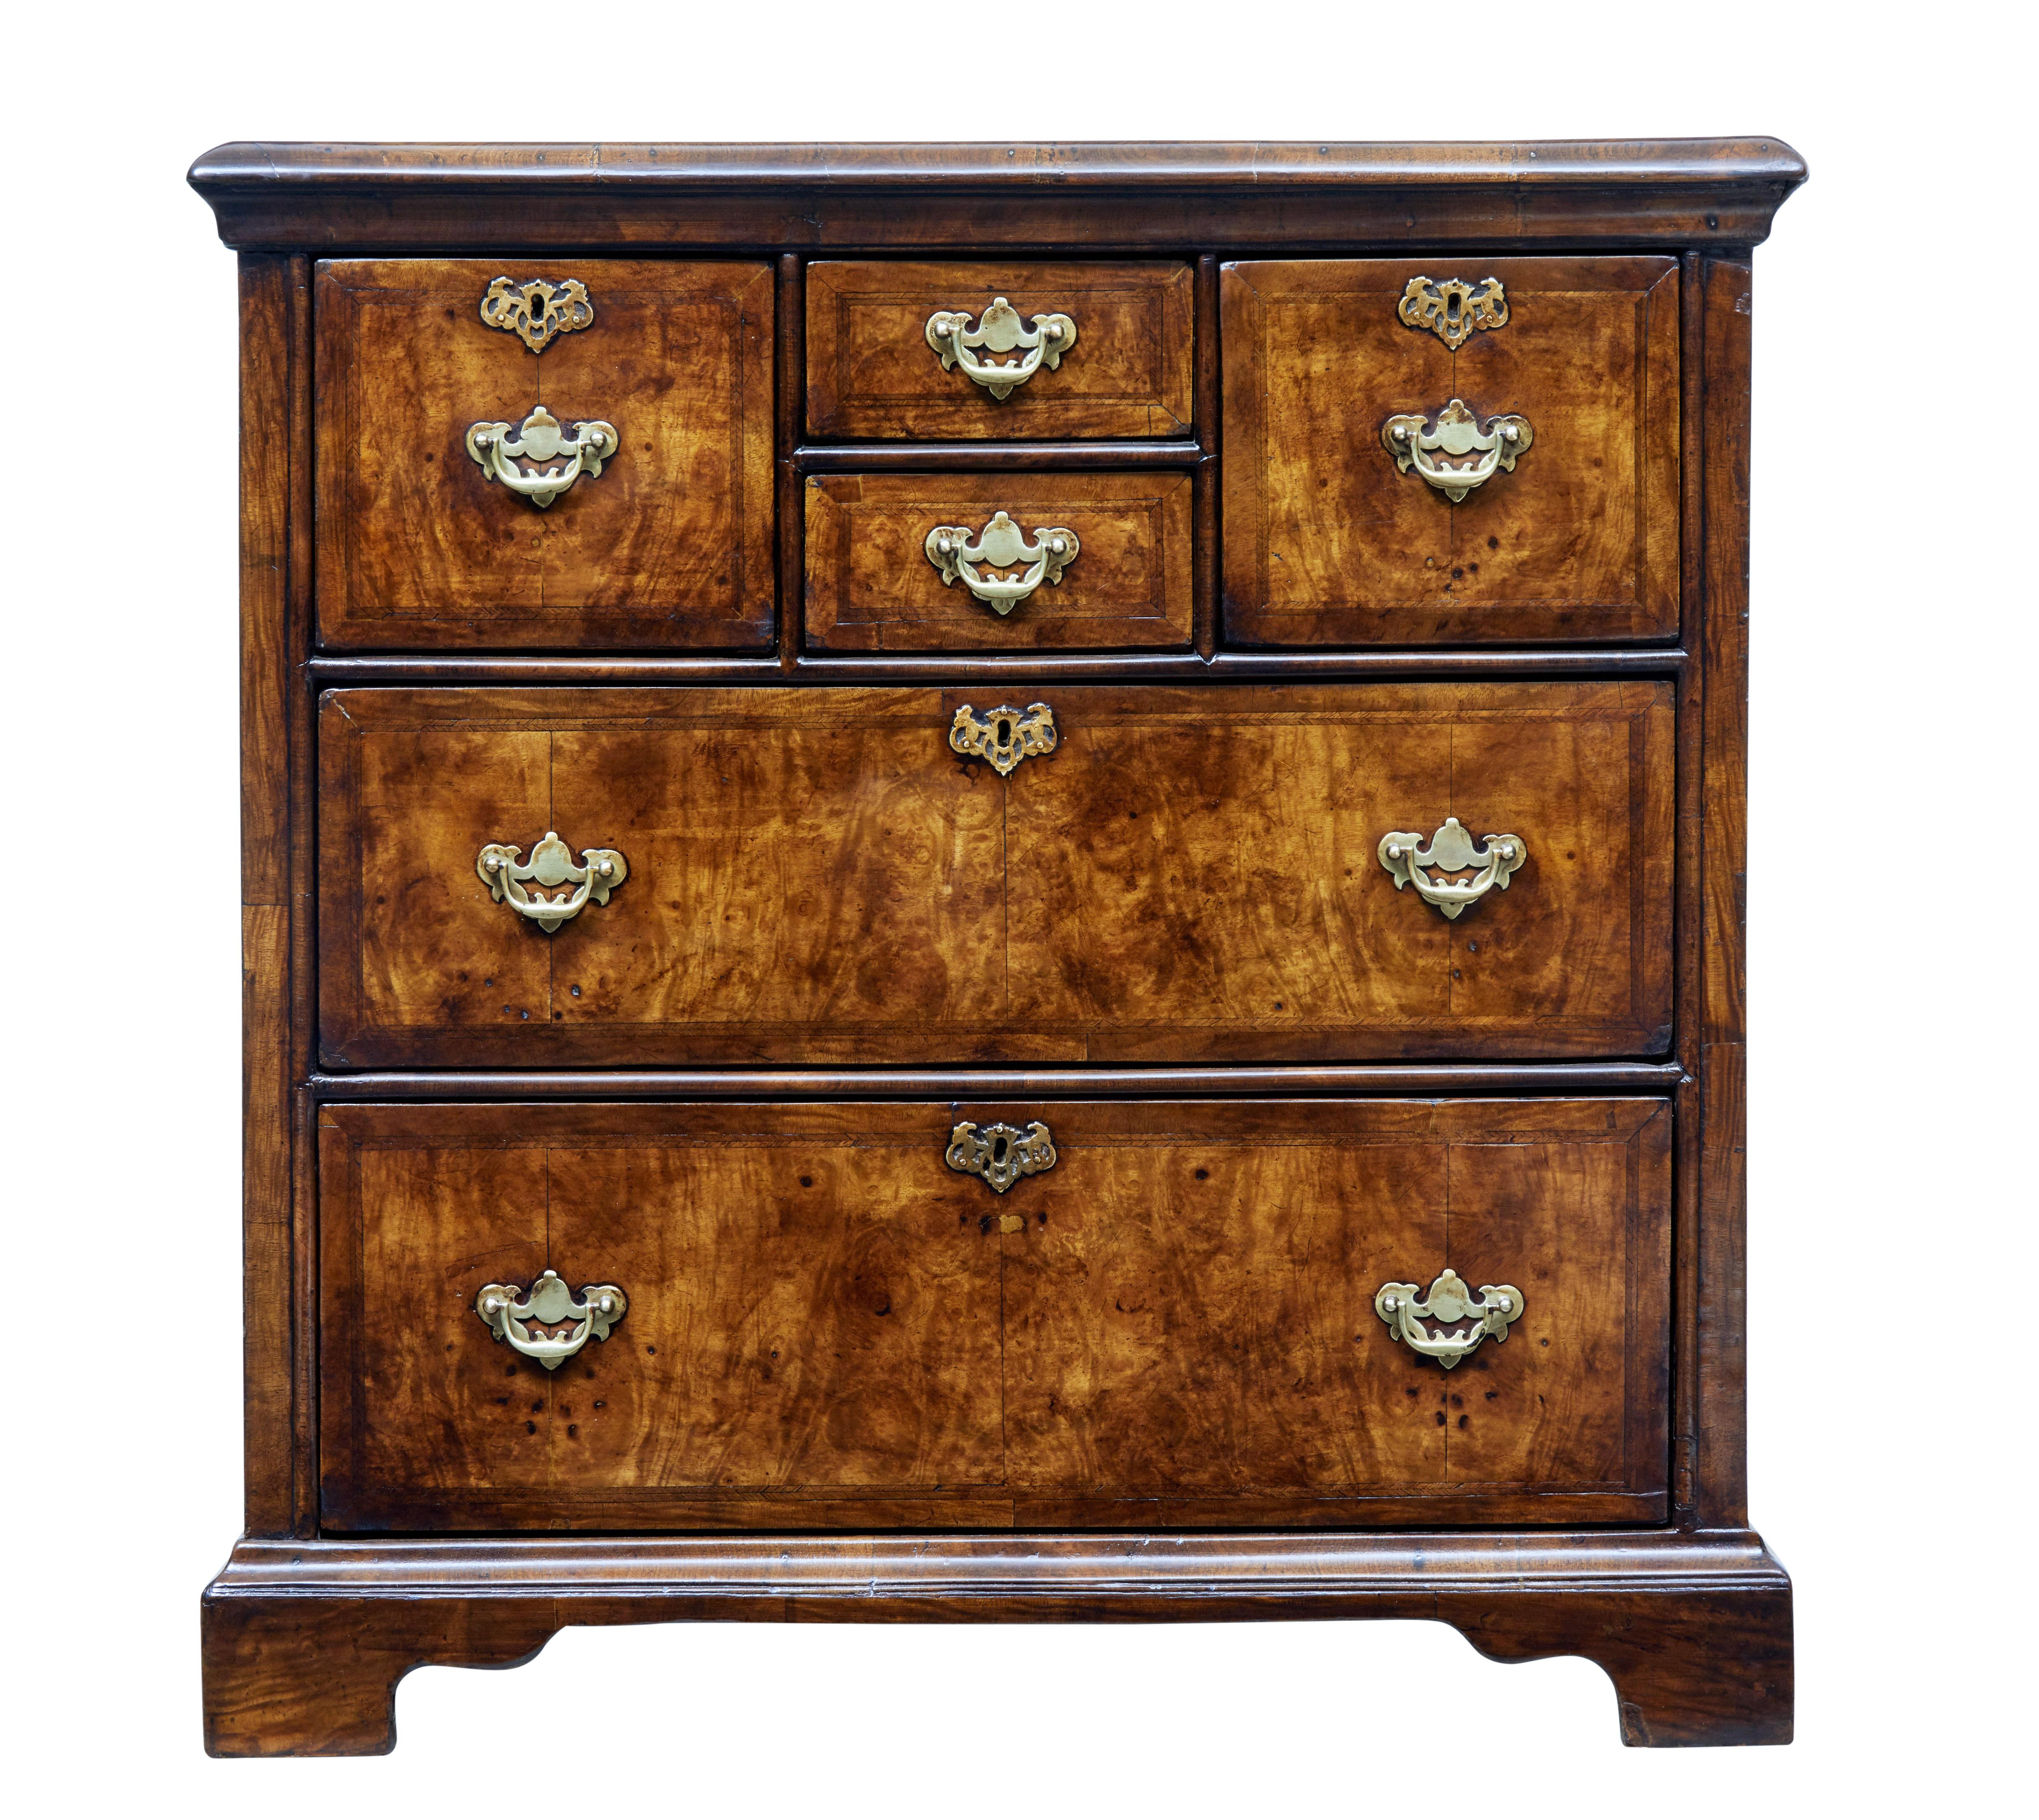 Unusual walnut chest of drawers, circa 1820.

4 smaller drawers over 2 large drawers. Fitted with brass handles and escutheons.

Drawer fronts and sides with herring bone cross banding. Top surface with a circular cross banded top design with